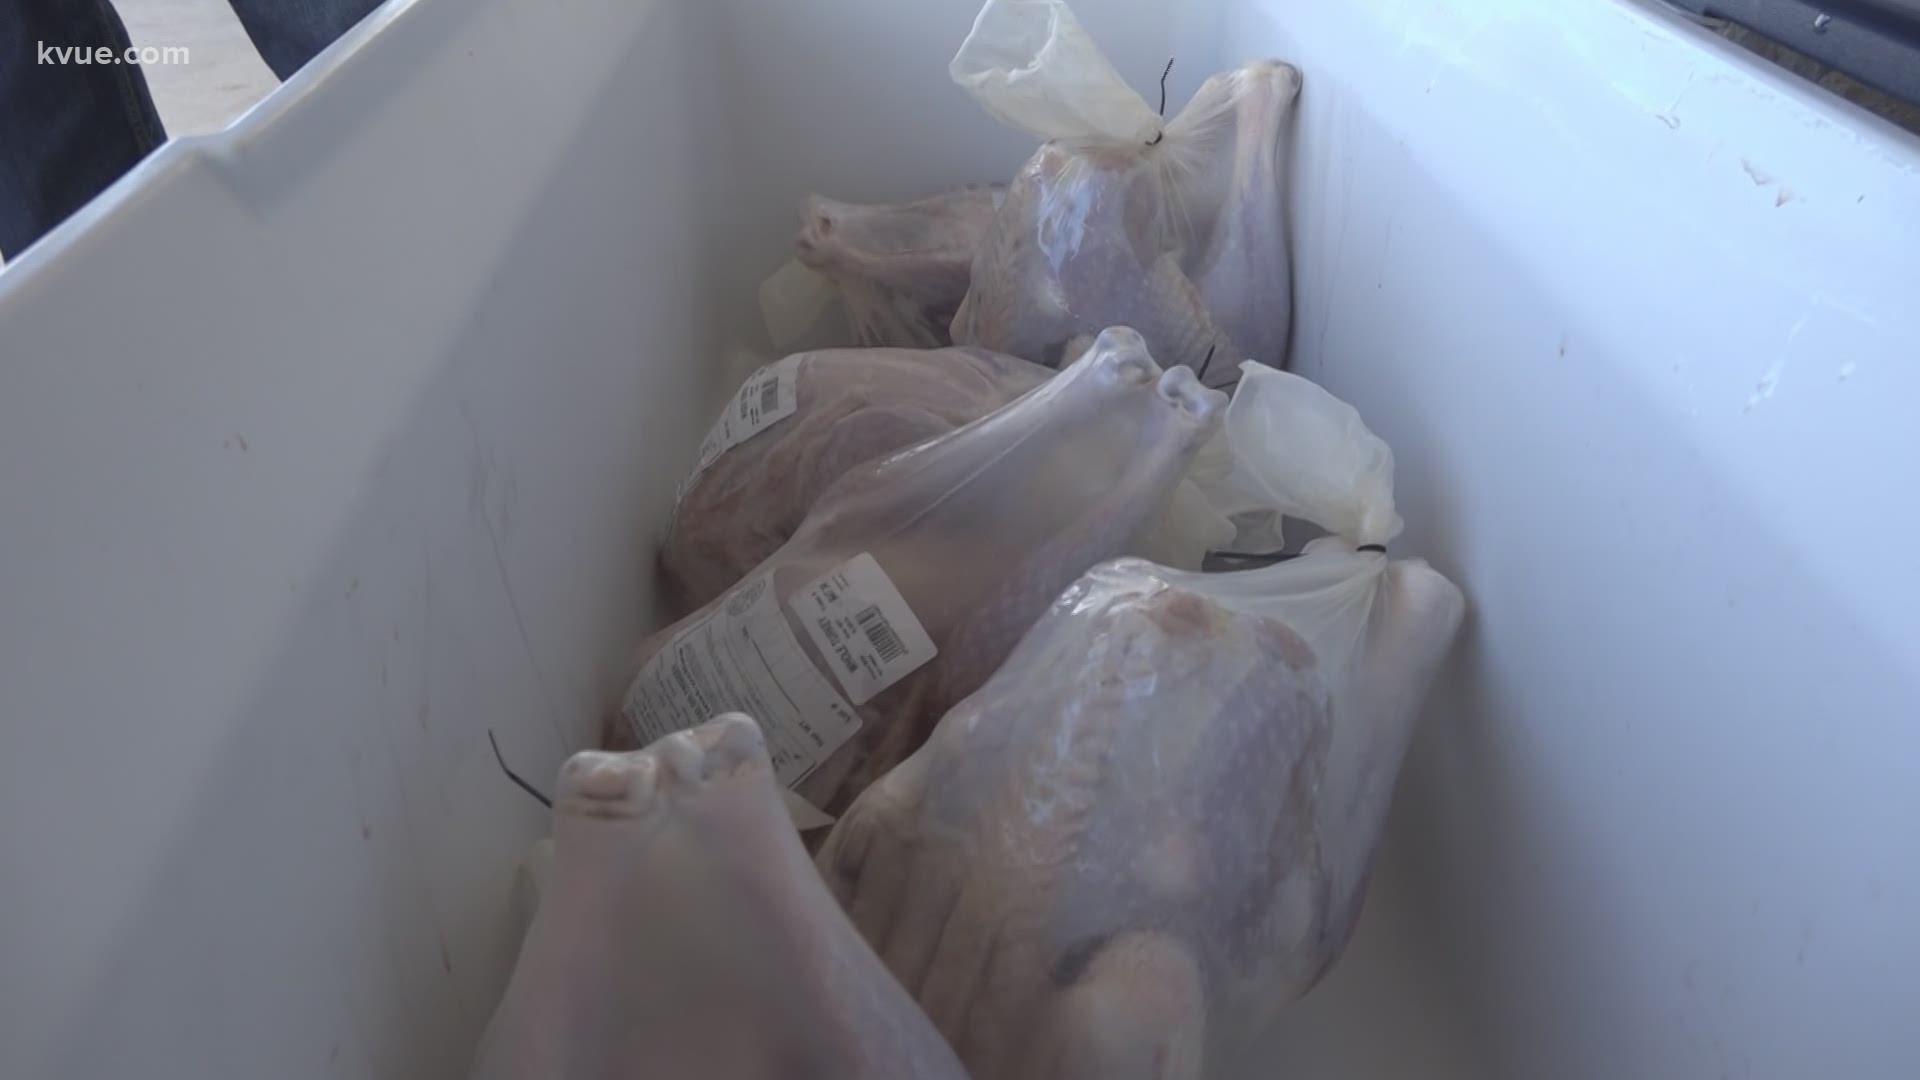 Thanksgiving will look a lot different this year because of the pandemic. KVUE's Luis de Leon explains how the changes are impacting turkey farmers.